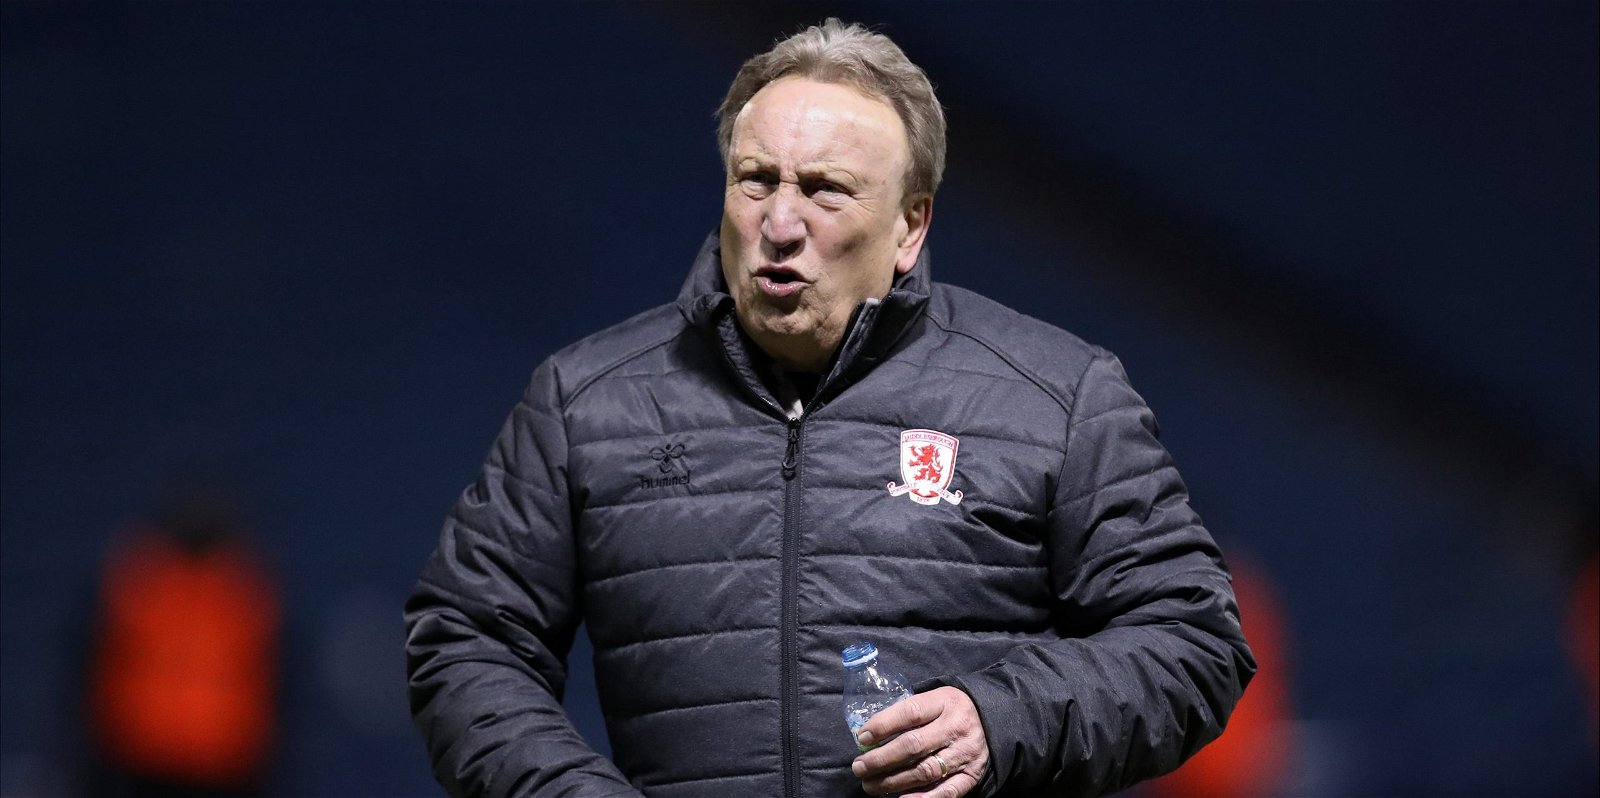 Middlesbrough, &#8216;We&#8217;re decimated&#8217; &#8211; Middlesbrough boss concerned about mounting injuries